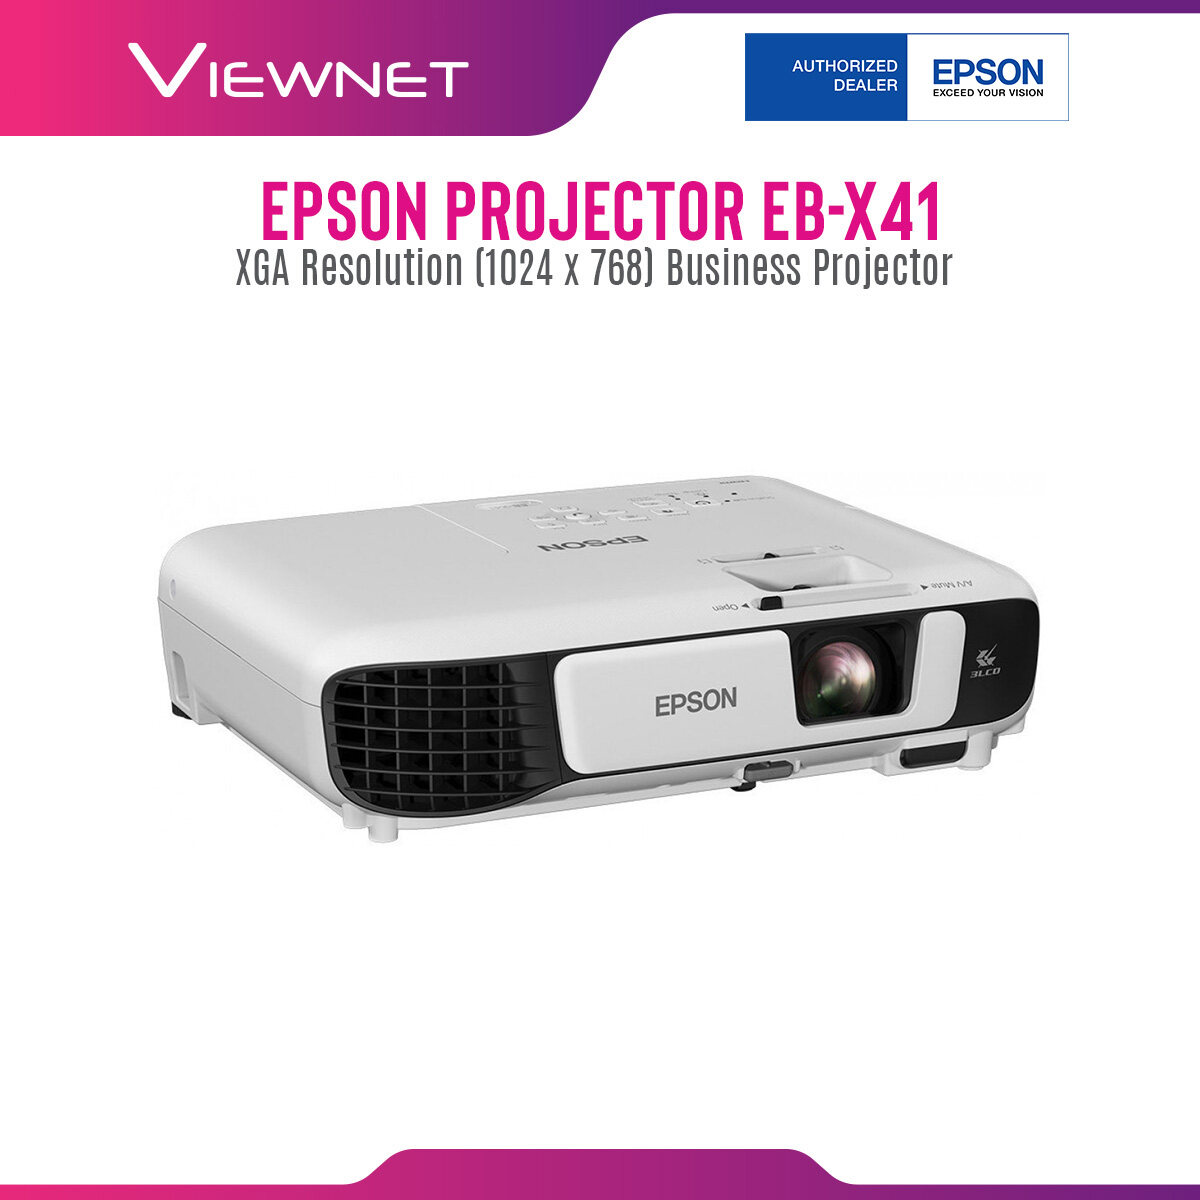 Epson Projector EB-X41 with XGA Resolution (1024 x 768), 3600 Lumens, 12000 Hours Lamp Life in Eco Mode